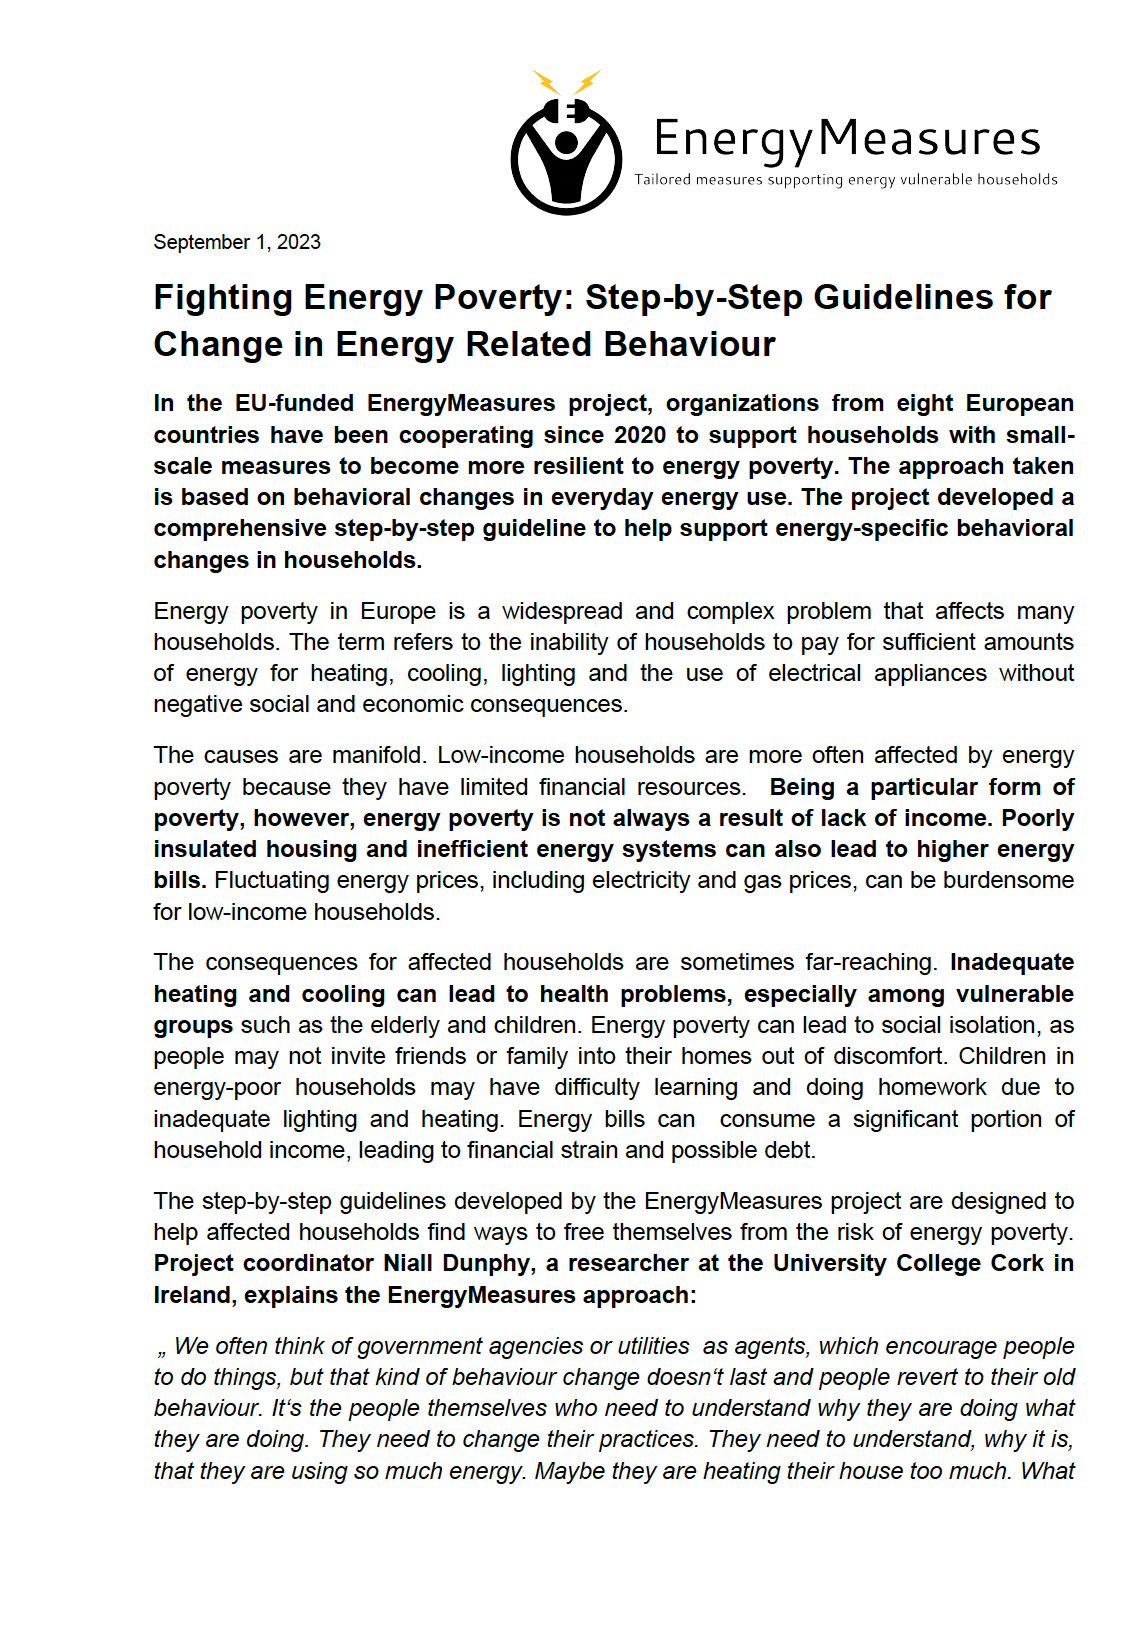 Fighting Energy Poverty: Step-by-Step Guidelines for Change in Energy Related Behaviour